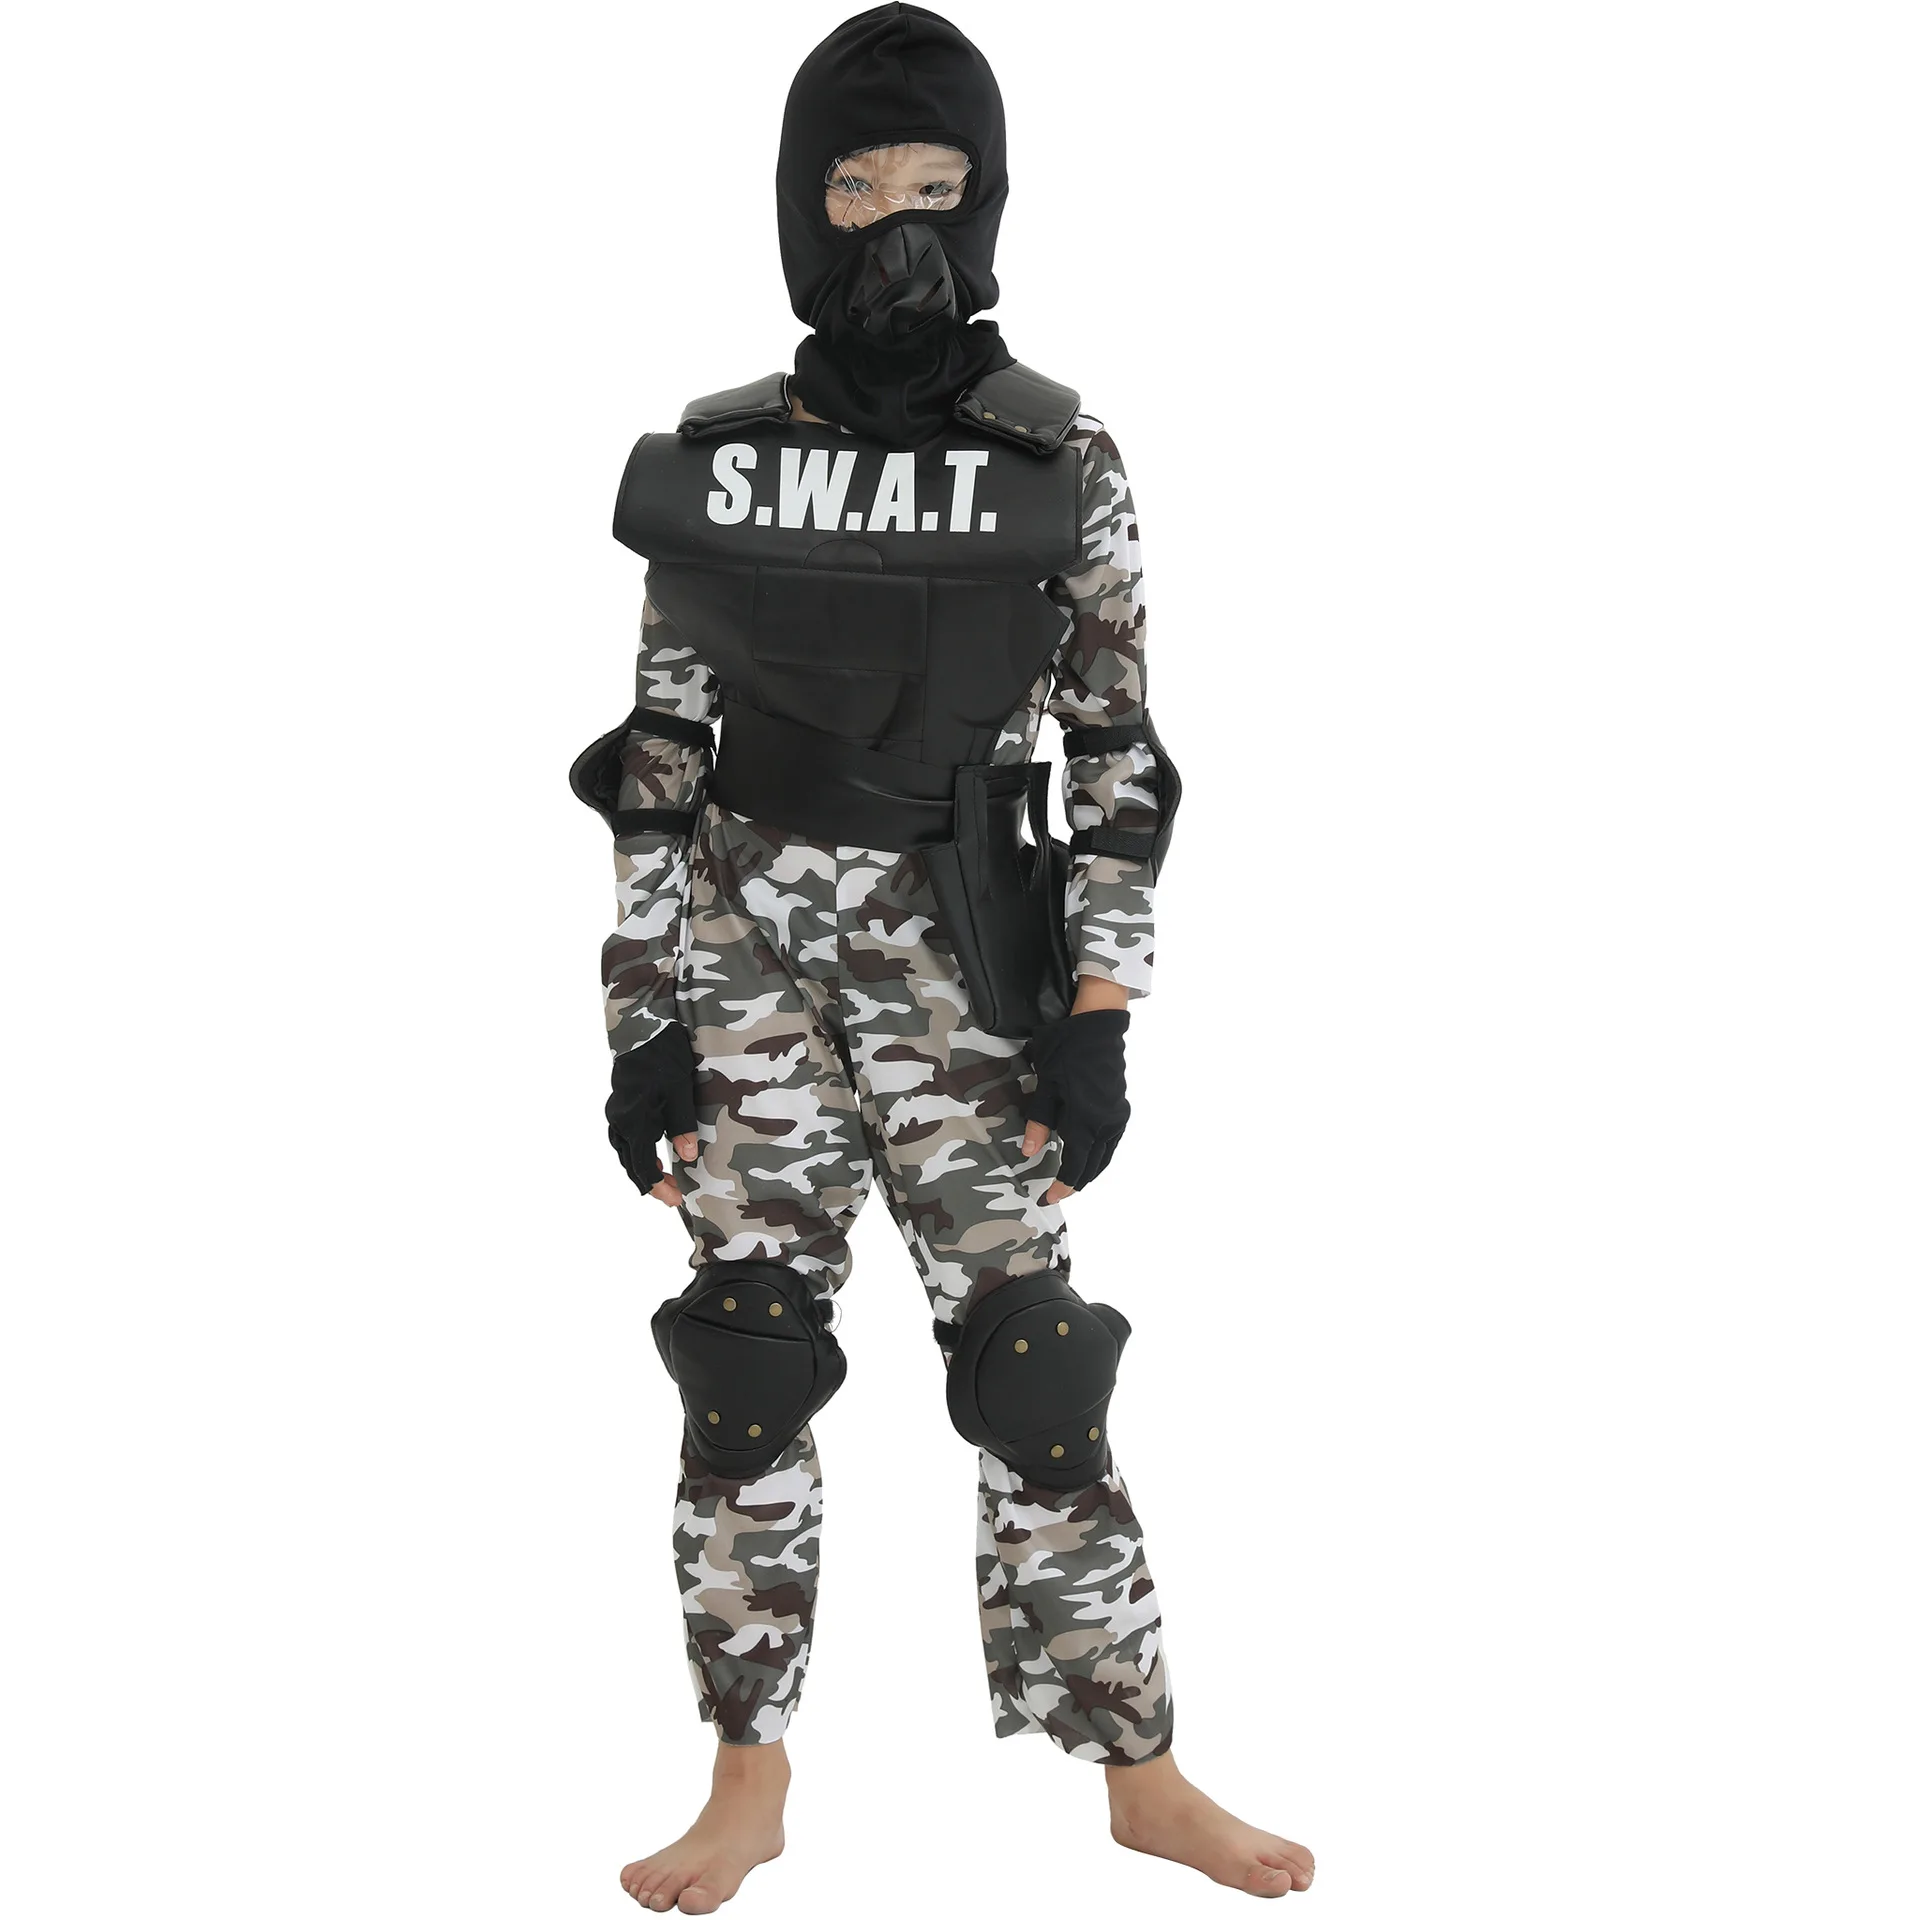 

Anti-terrorism Elite Children's Cosplay Costume Special Soldier Costume Stage Performance Wear Halloween Party Carnival Clothes